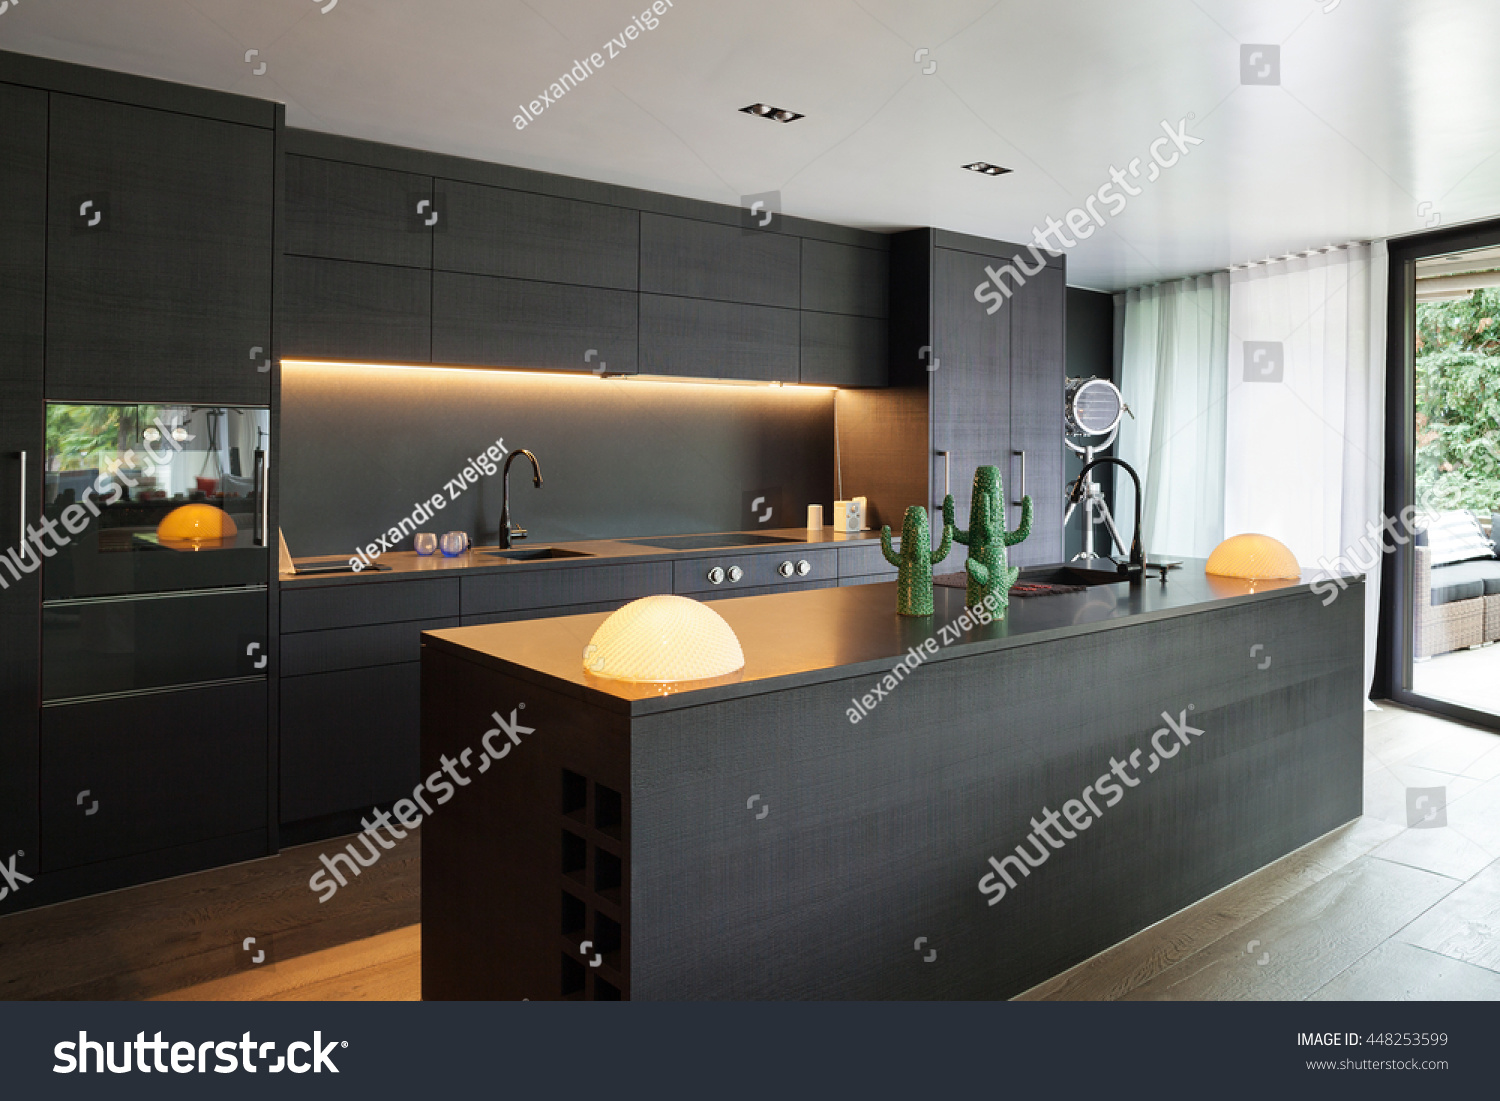 Modern kitchen with black furniture and wooden floor #448253599